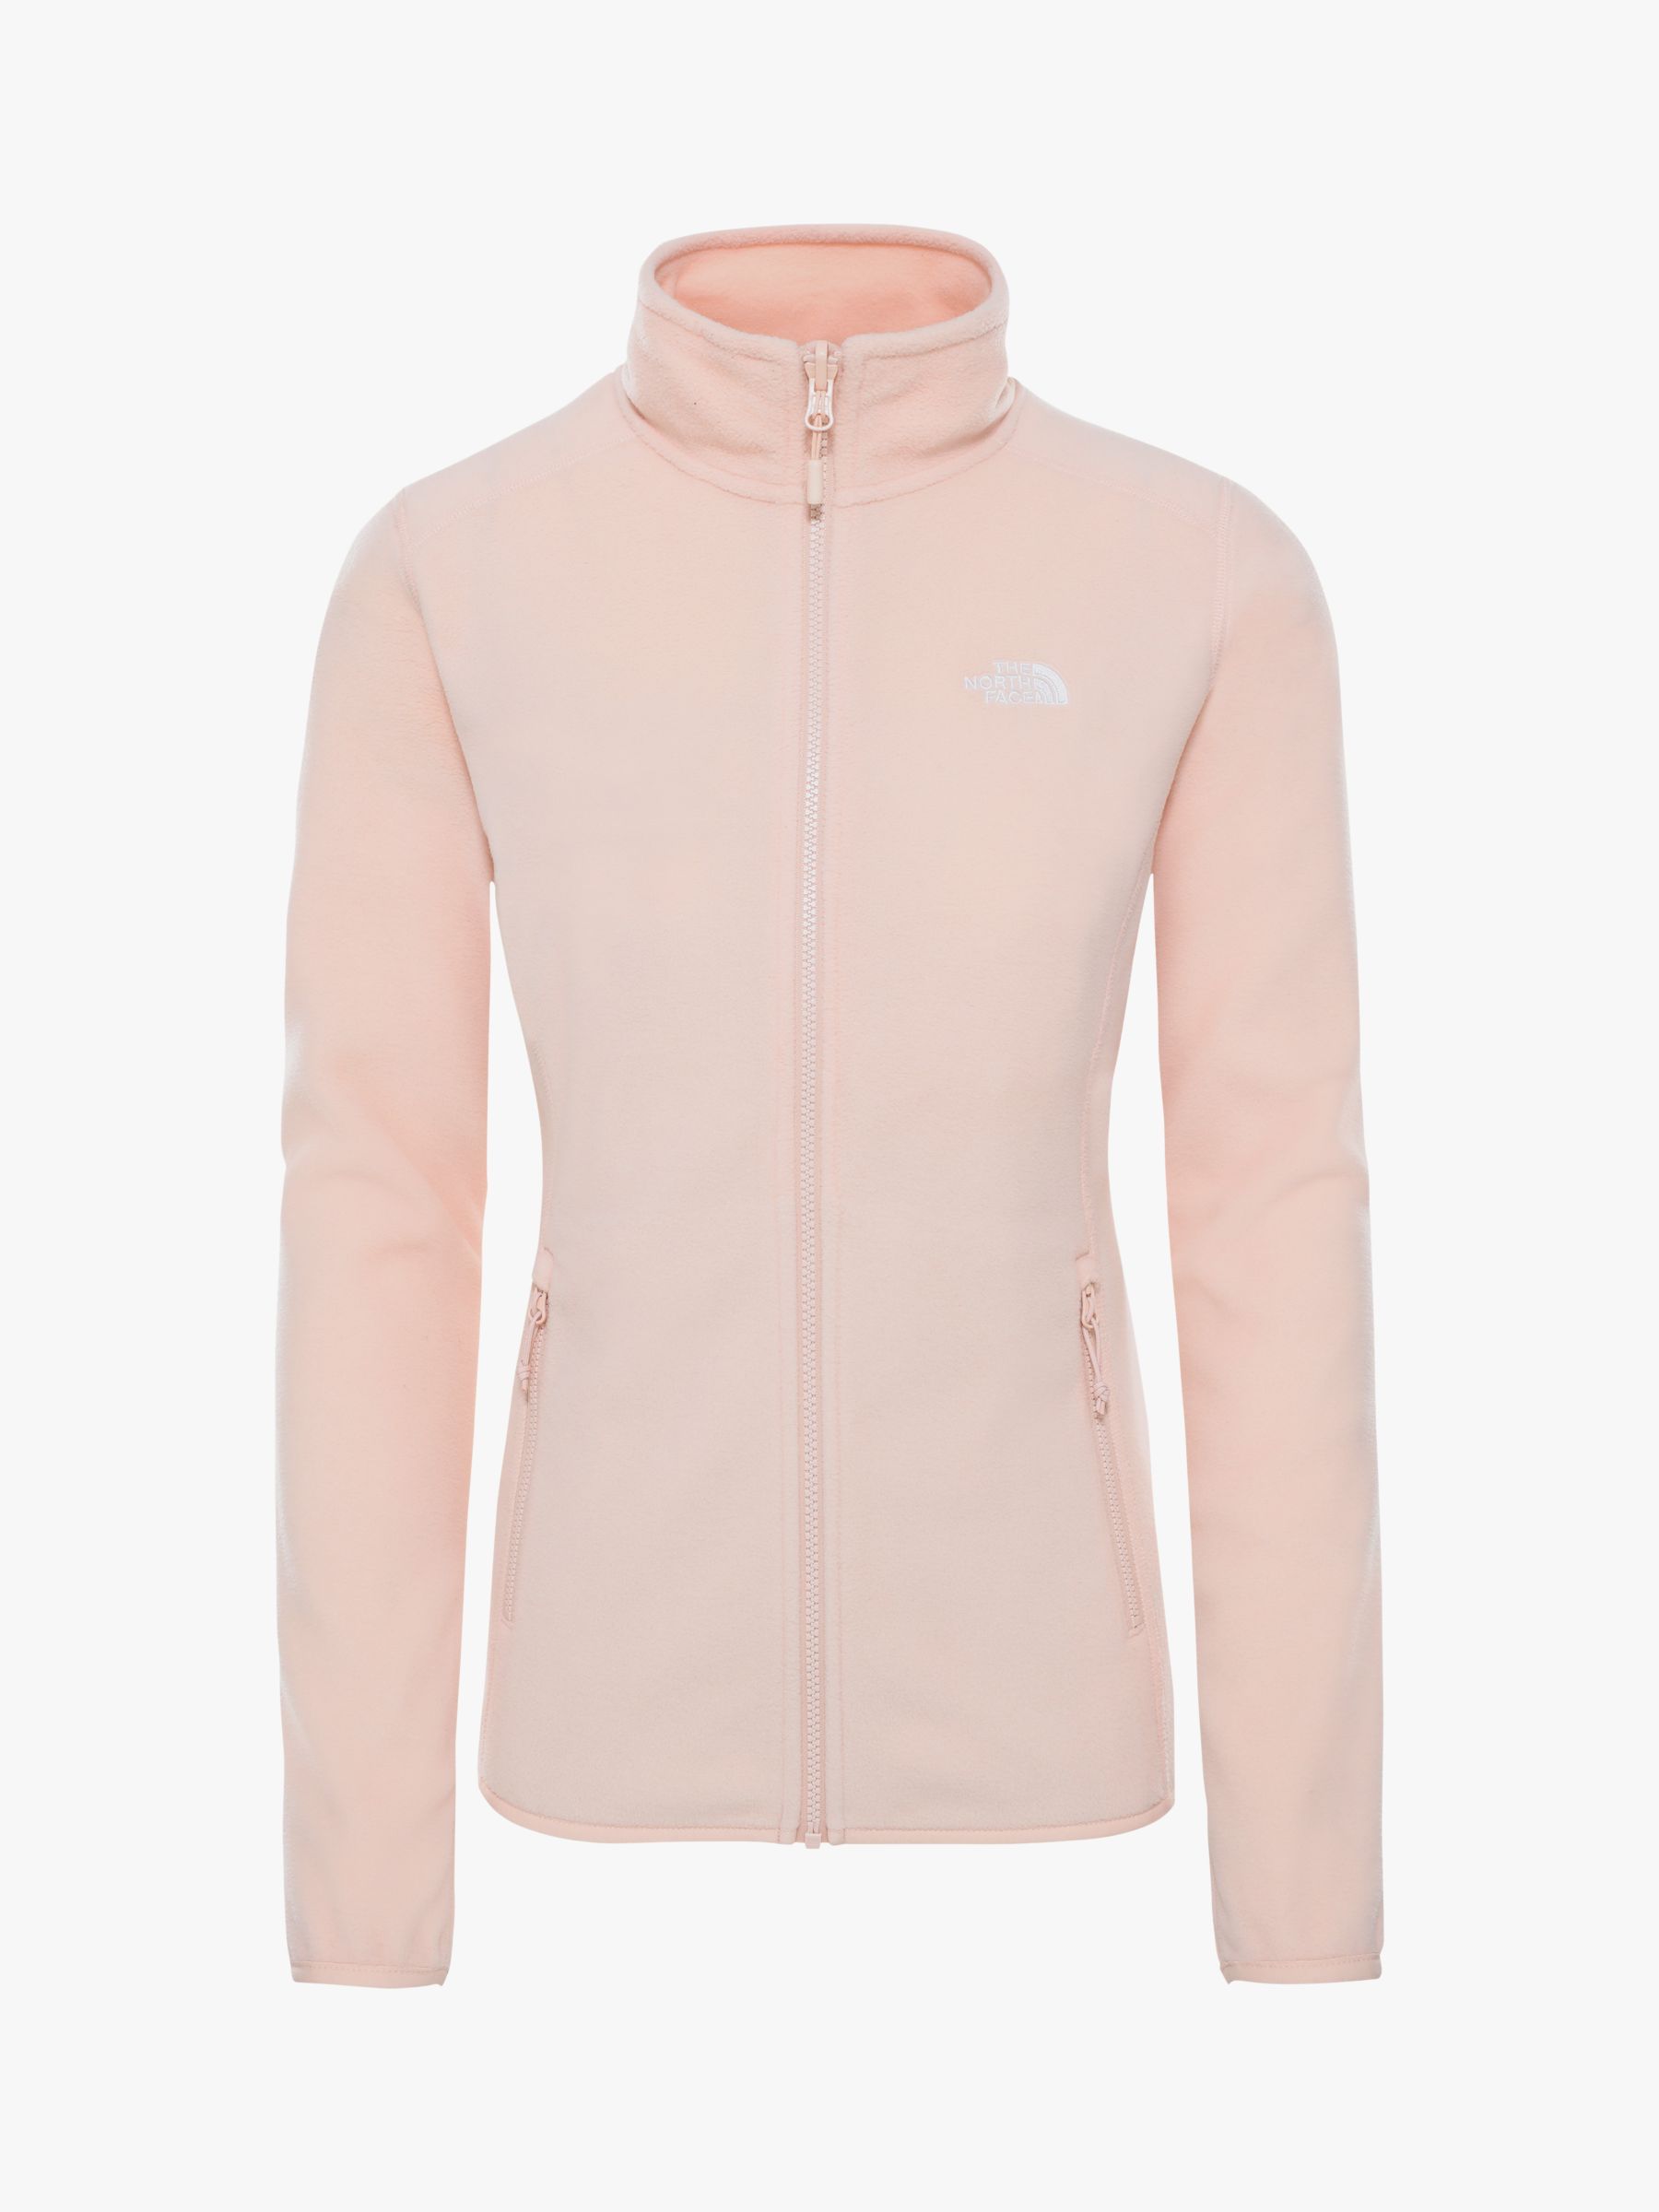 north face puffer jacket womens pink 